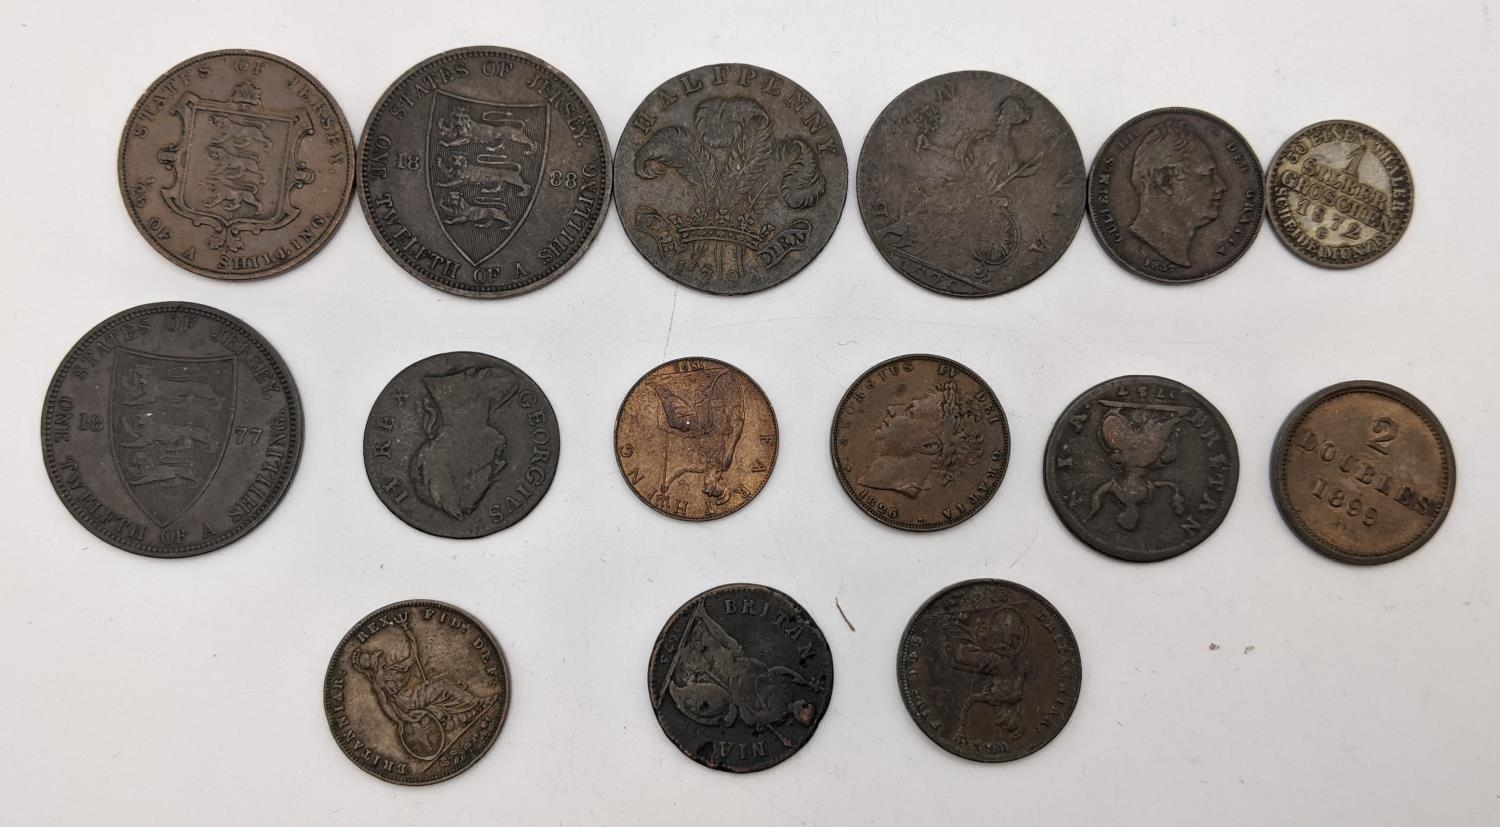 English/United Kingdom copper coinage to include Charles II 1675 farthing, George II farthings,